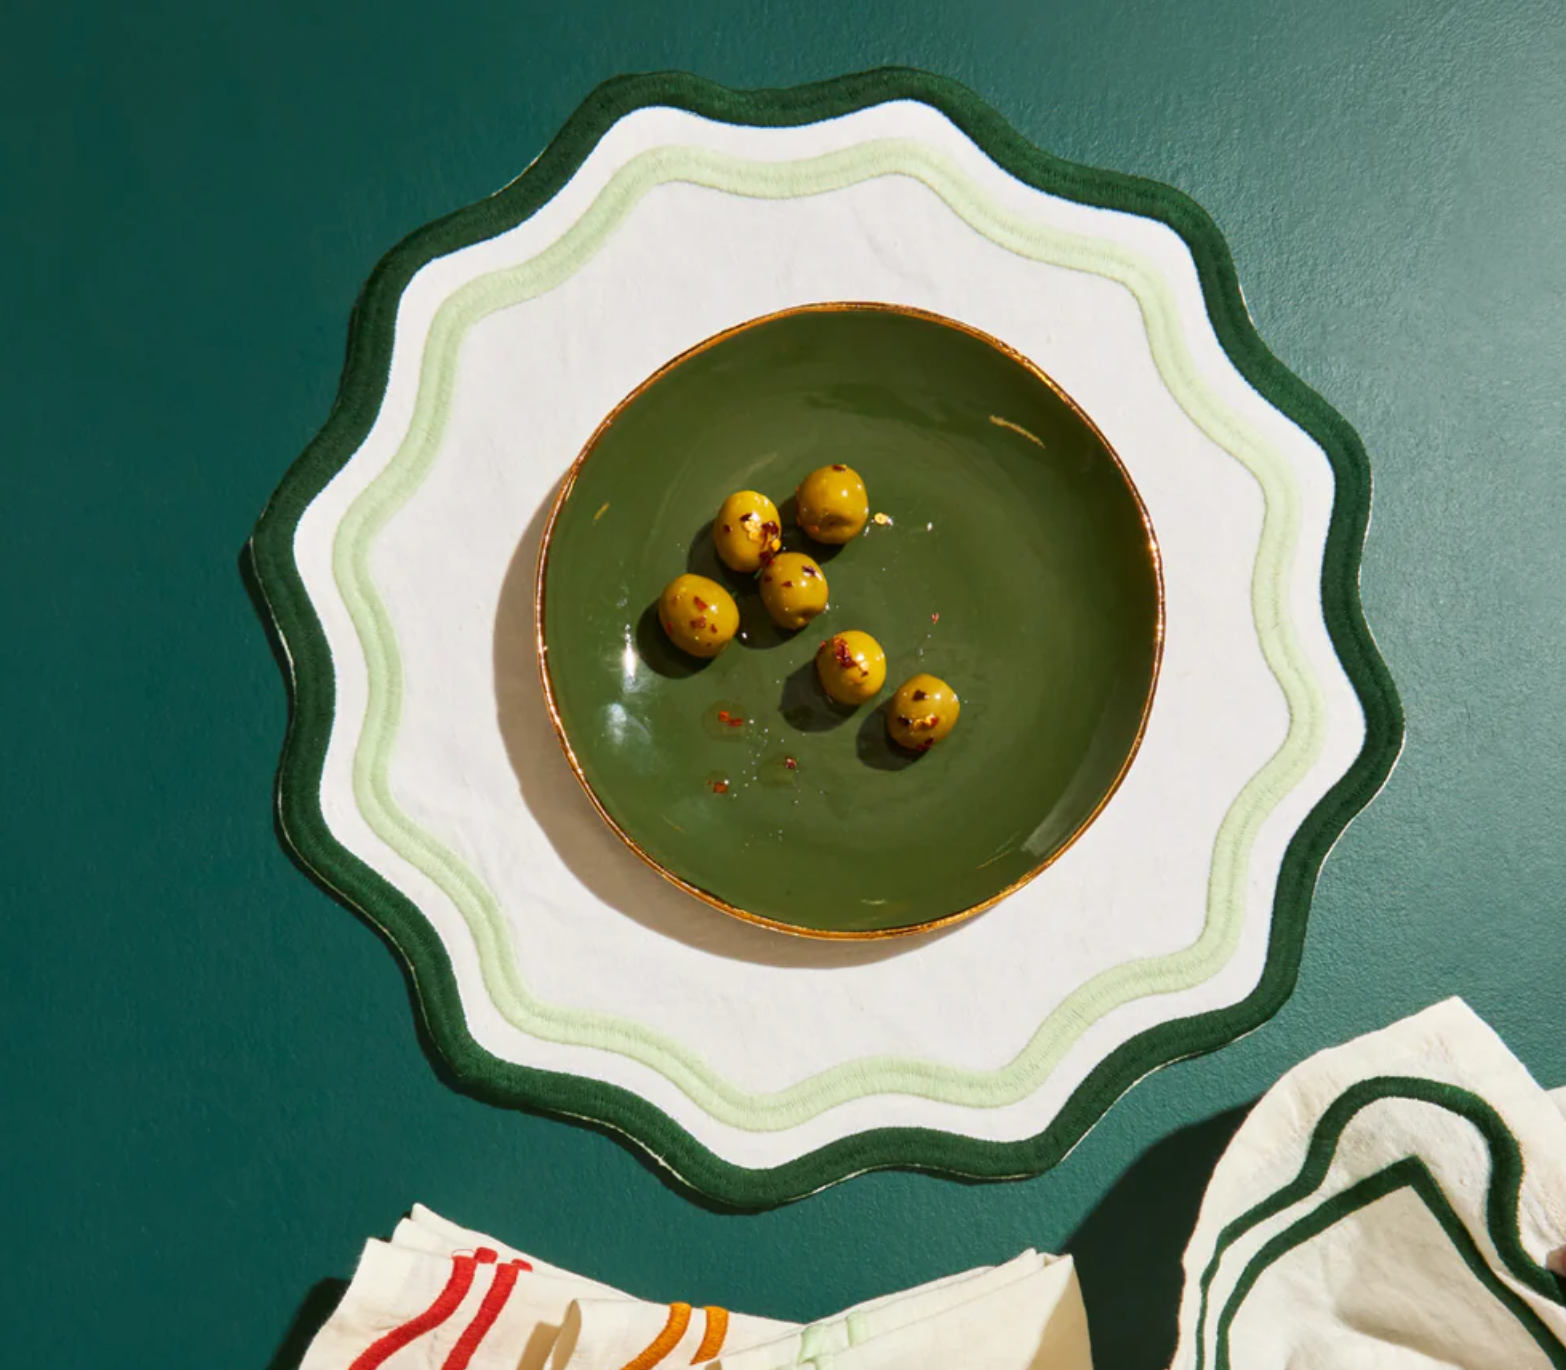 Product Image for Colorblock Embroidered Linen Placemats in Dark Green / Sage